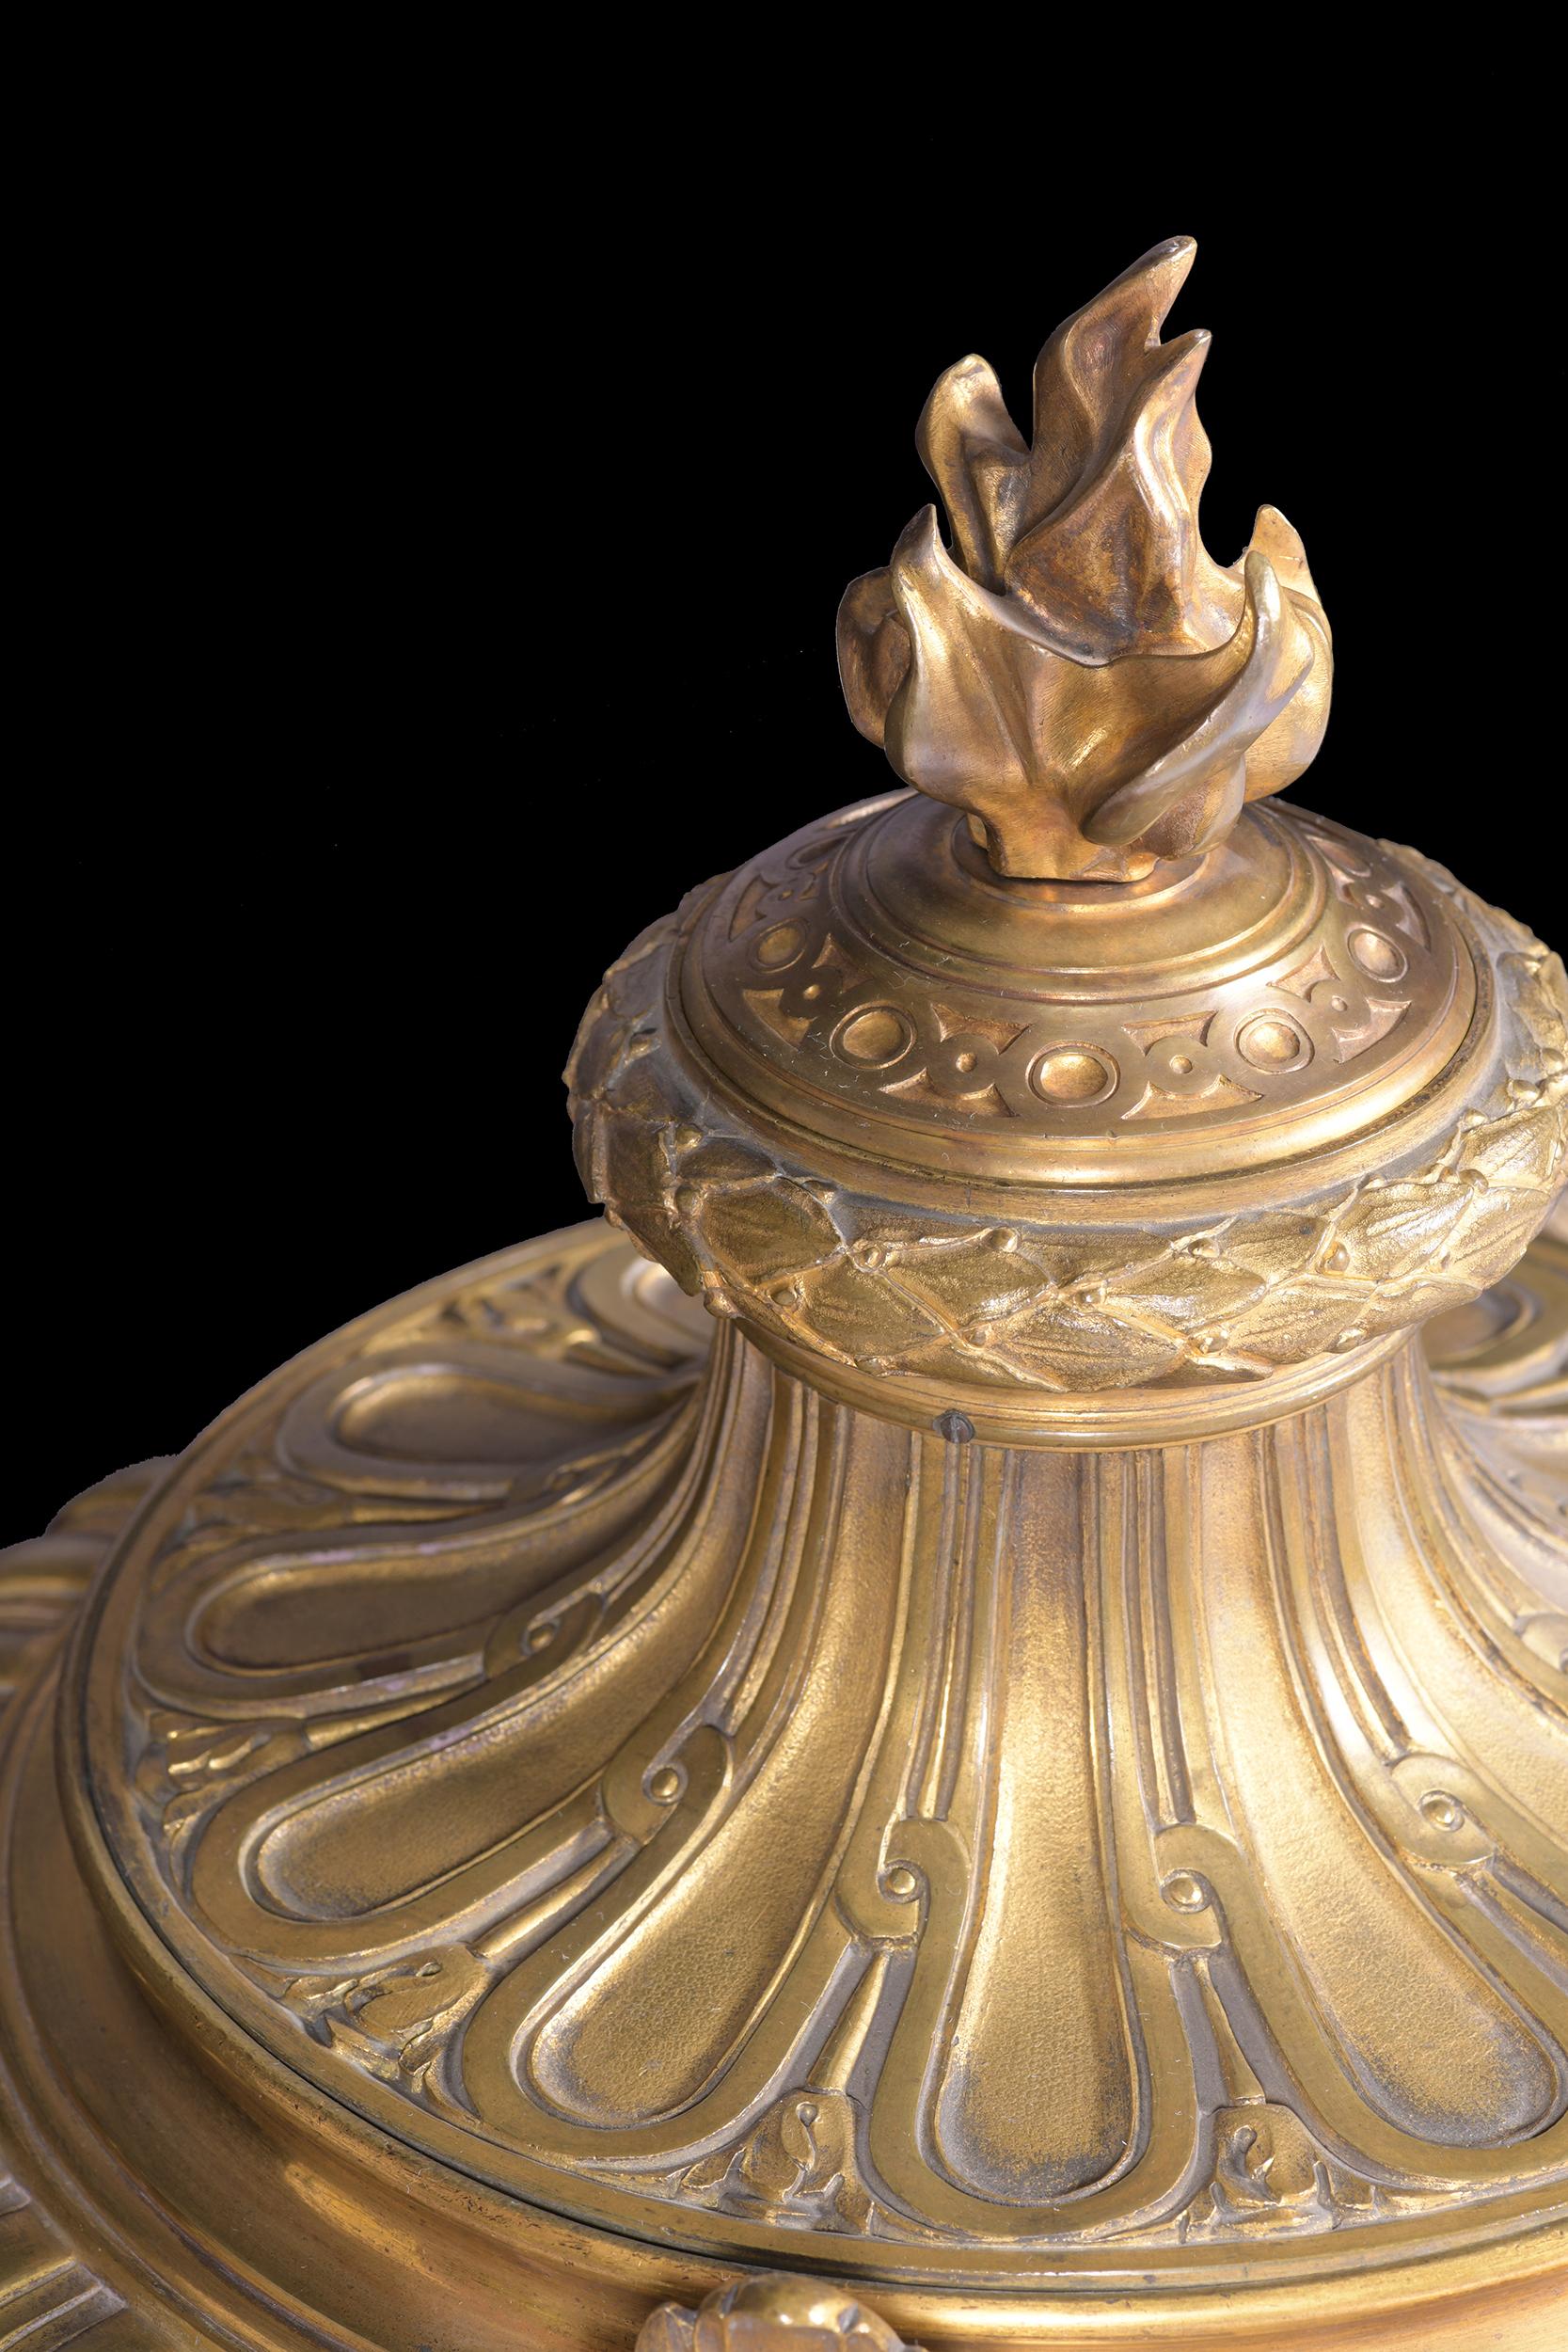 19th Century French Ormolu Centre Piece in the Louis XVI Style For Sale 5